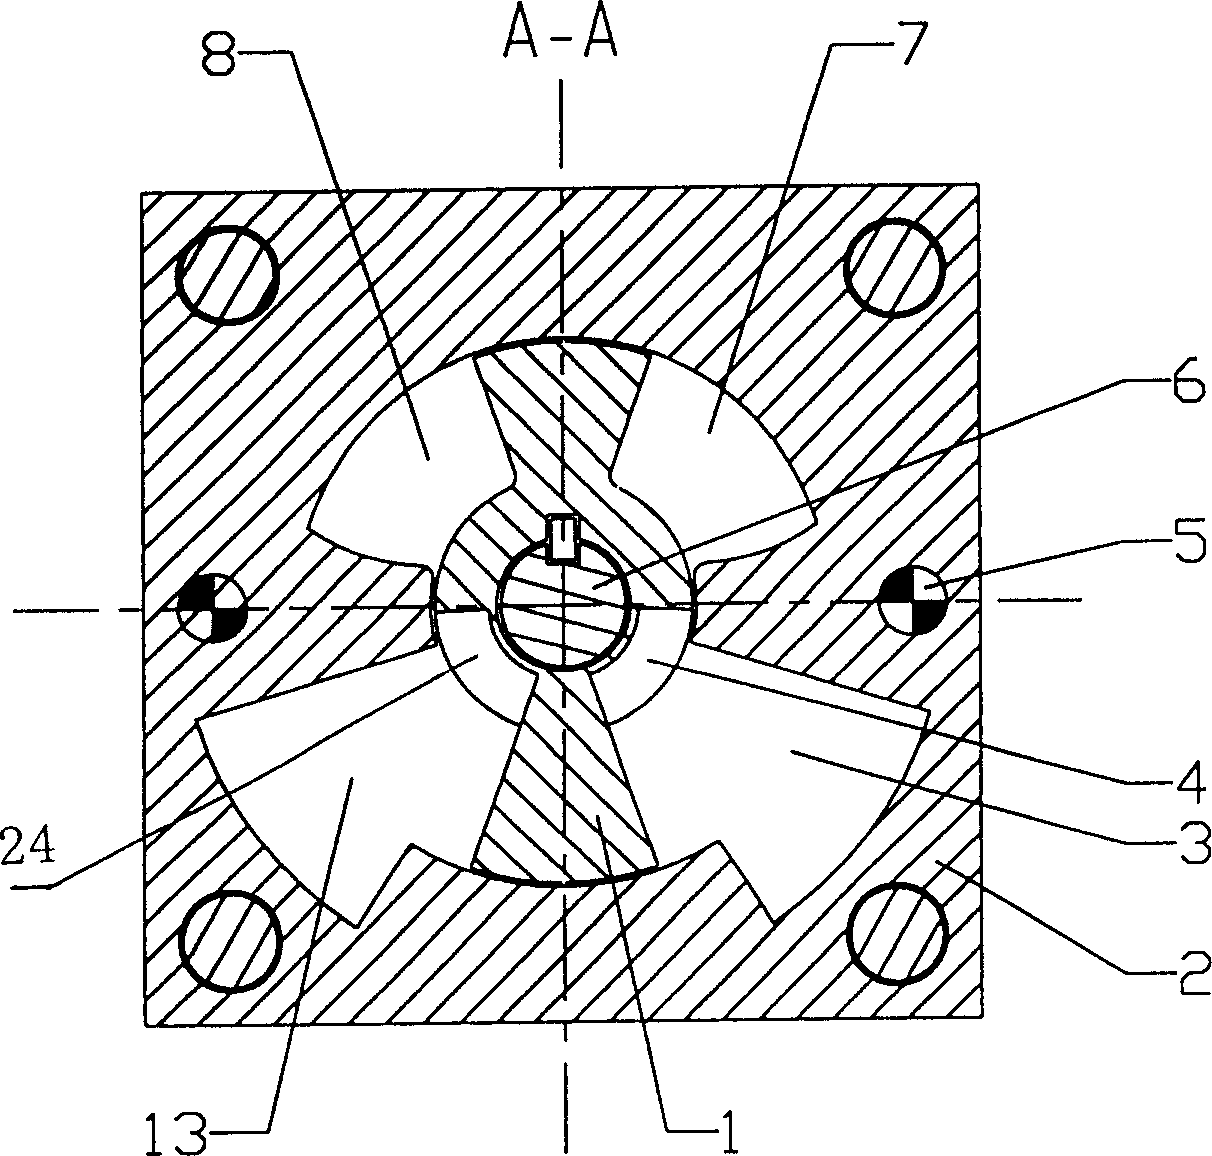 Miniature pendulum internal combustion engine with variable compression ratio